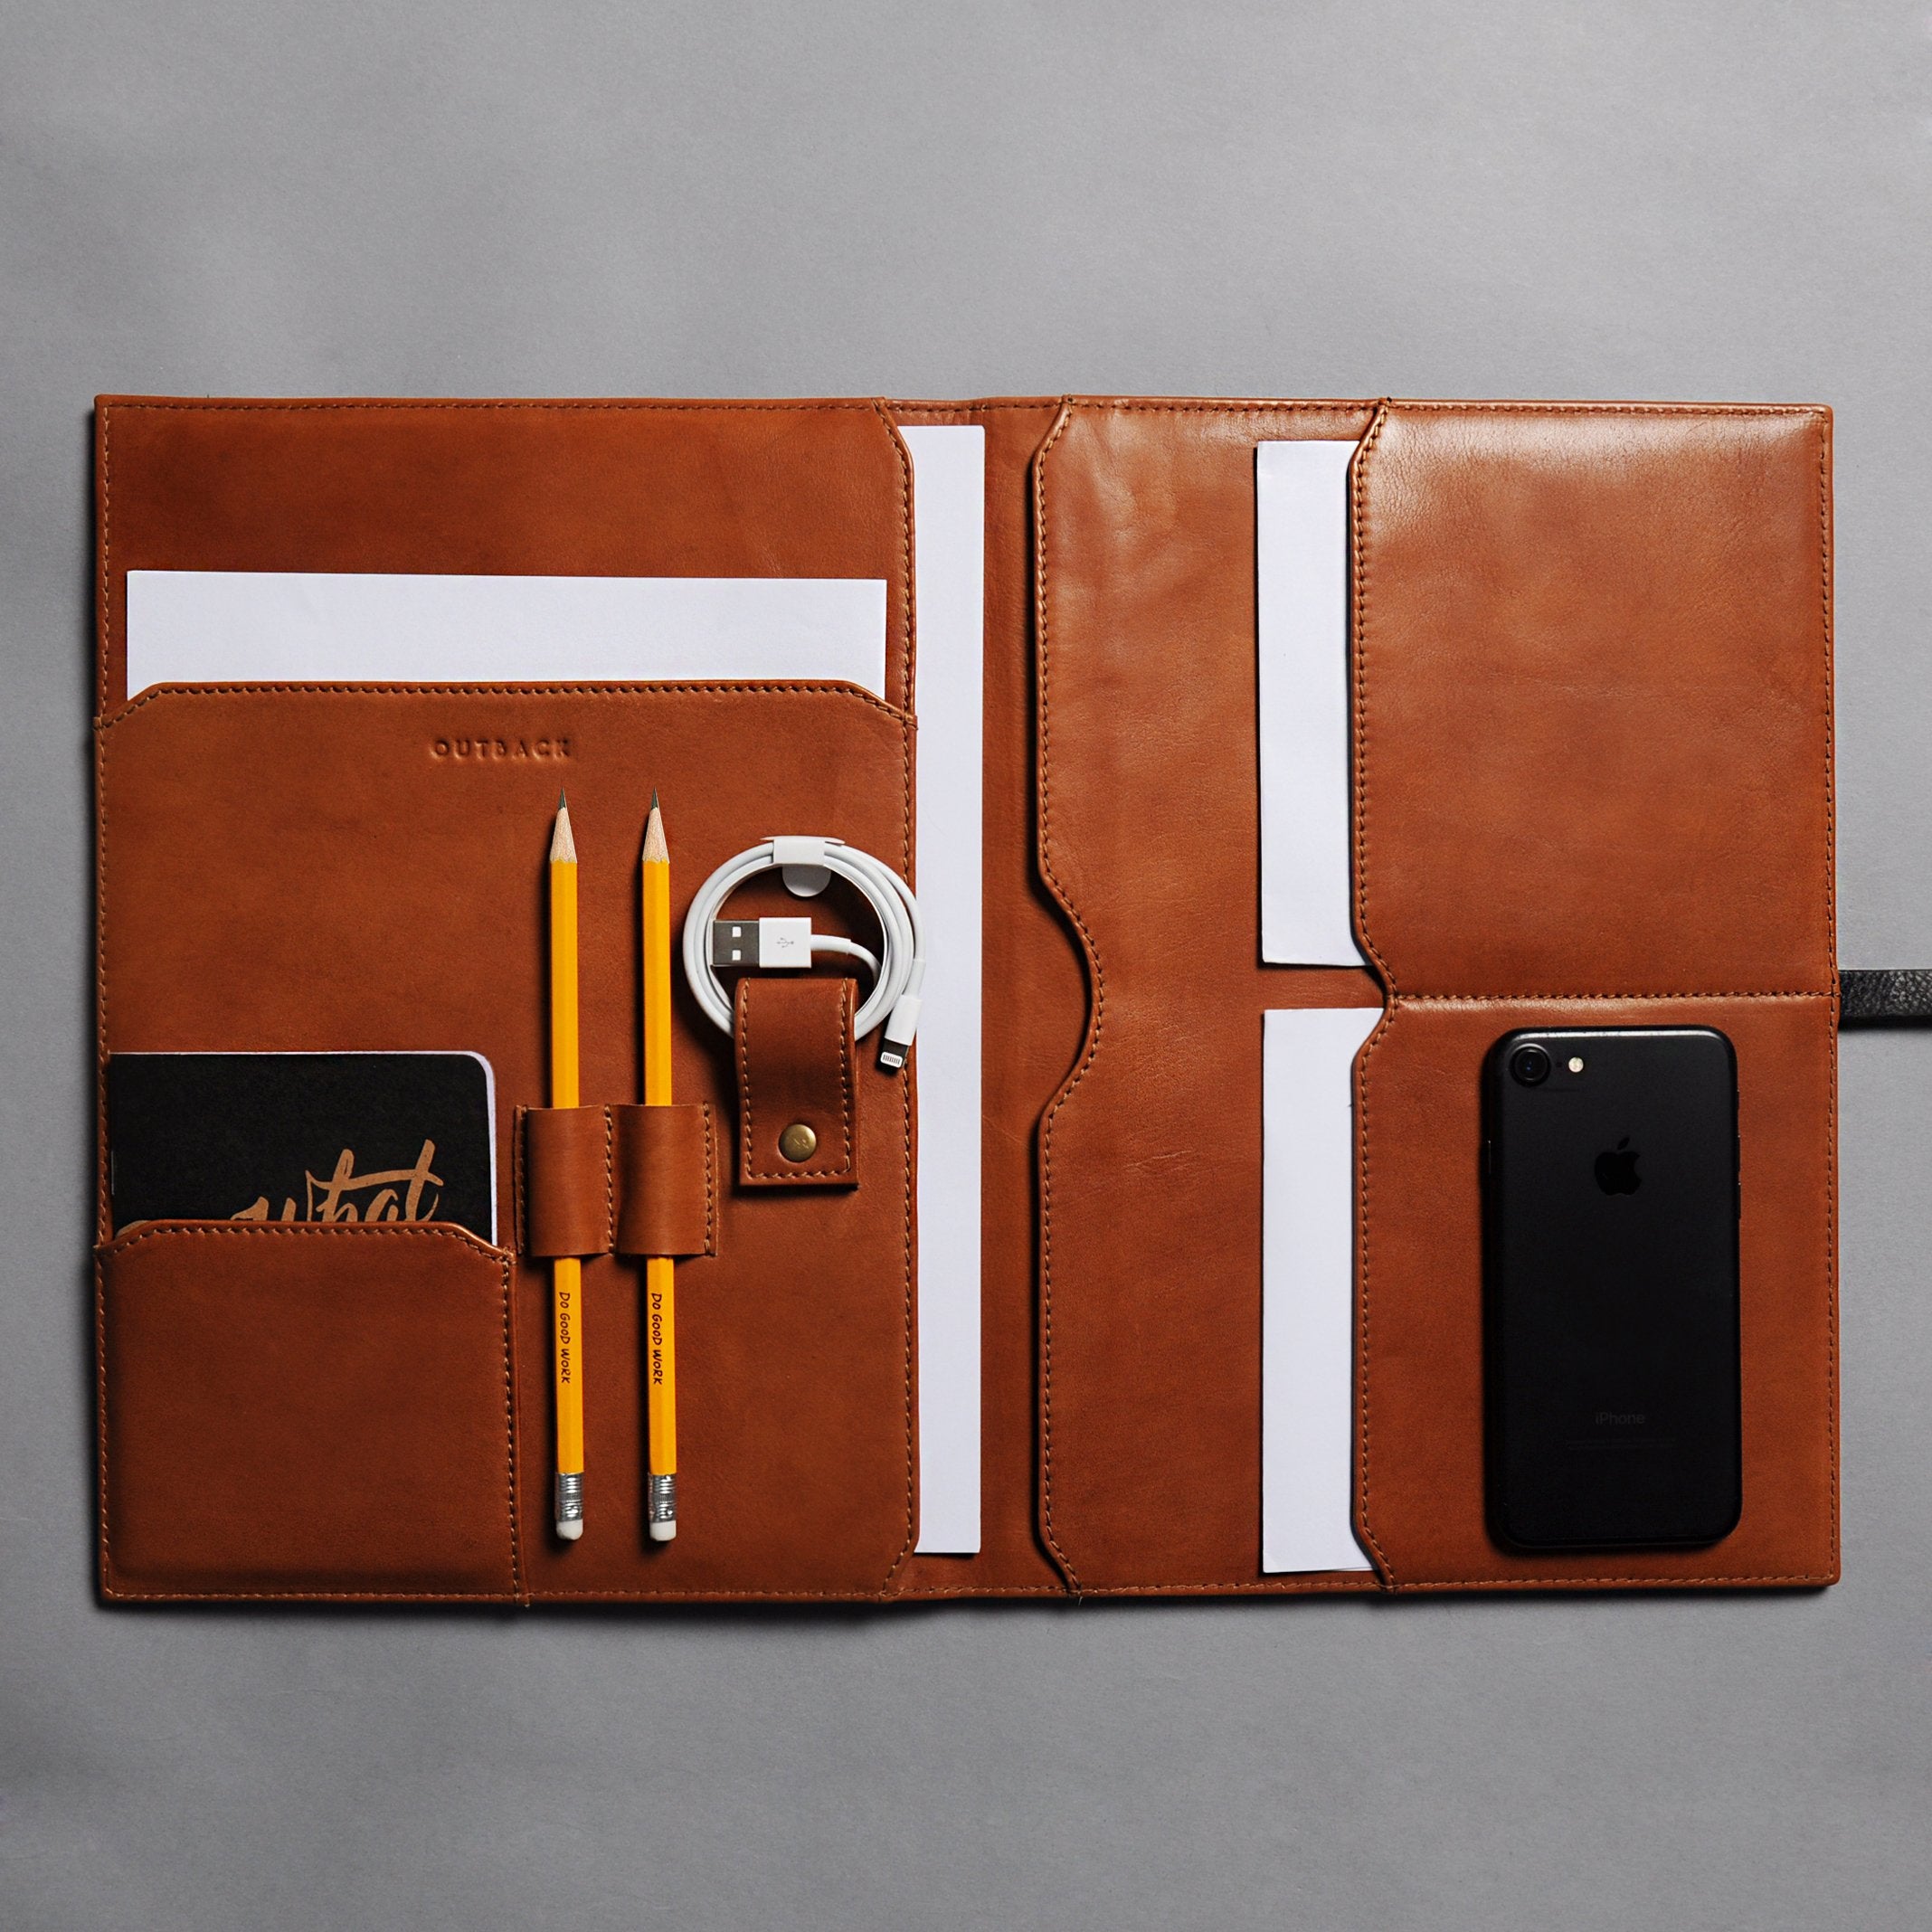 Daily leather organiser